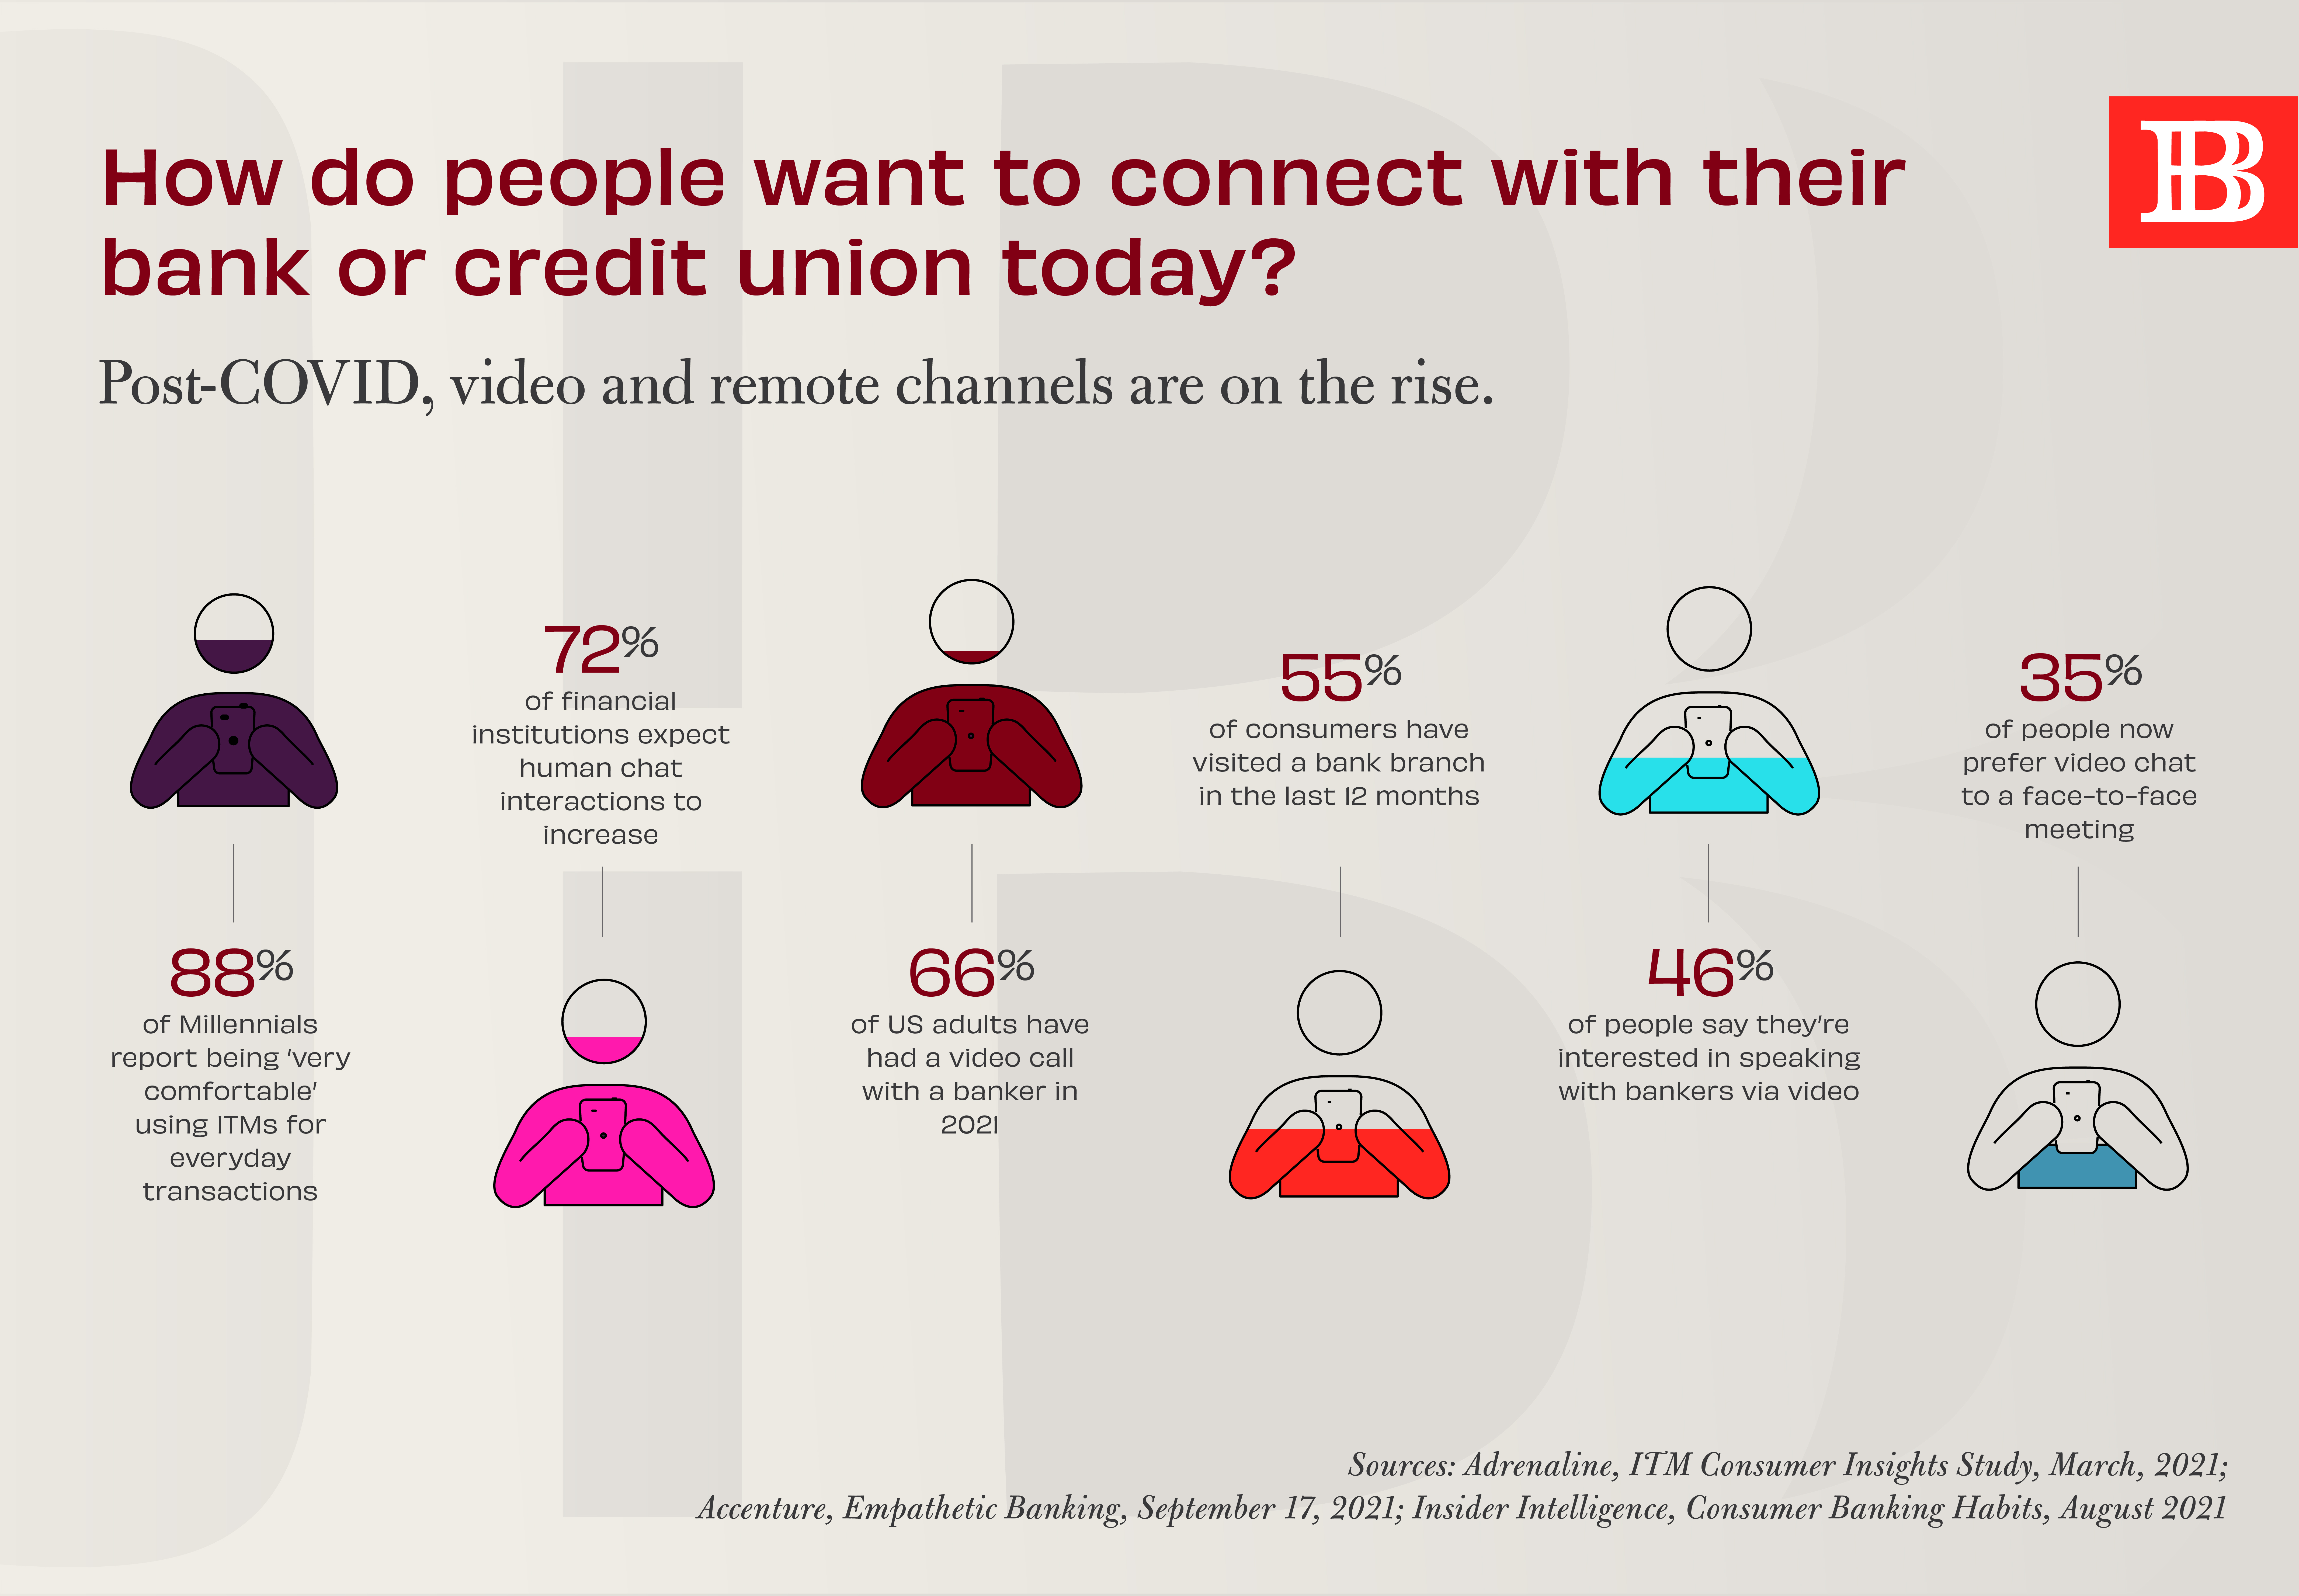 How do people want to connect with their bank or credit union today